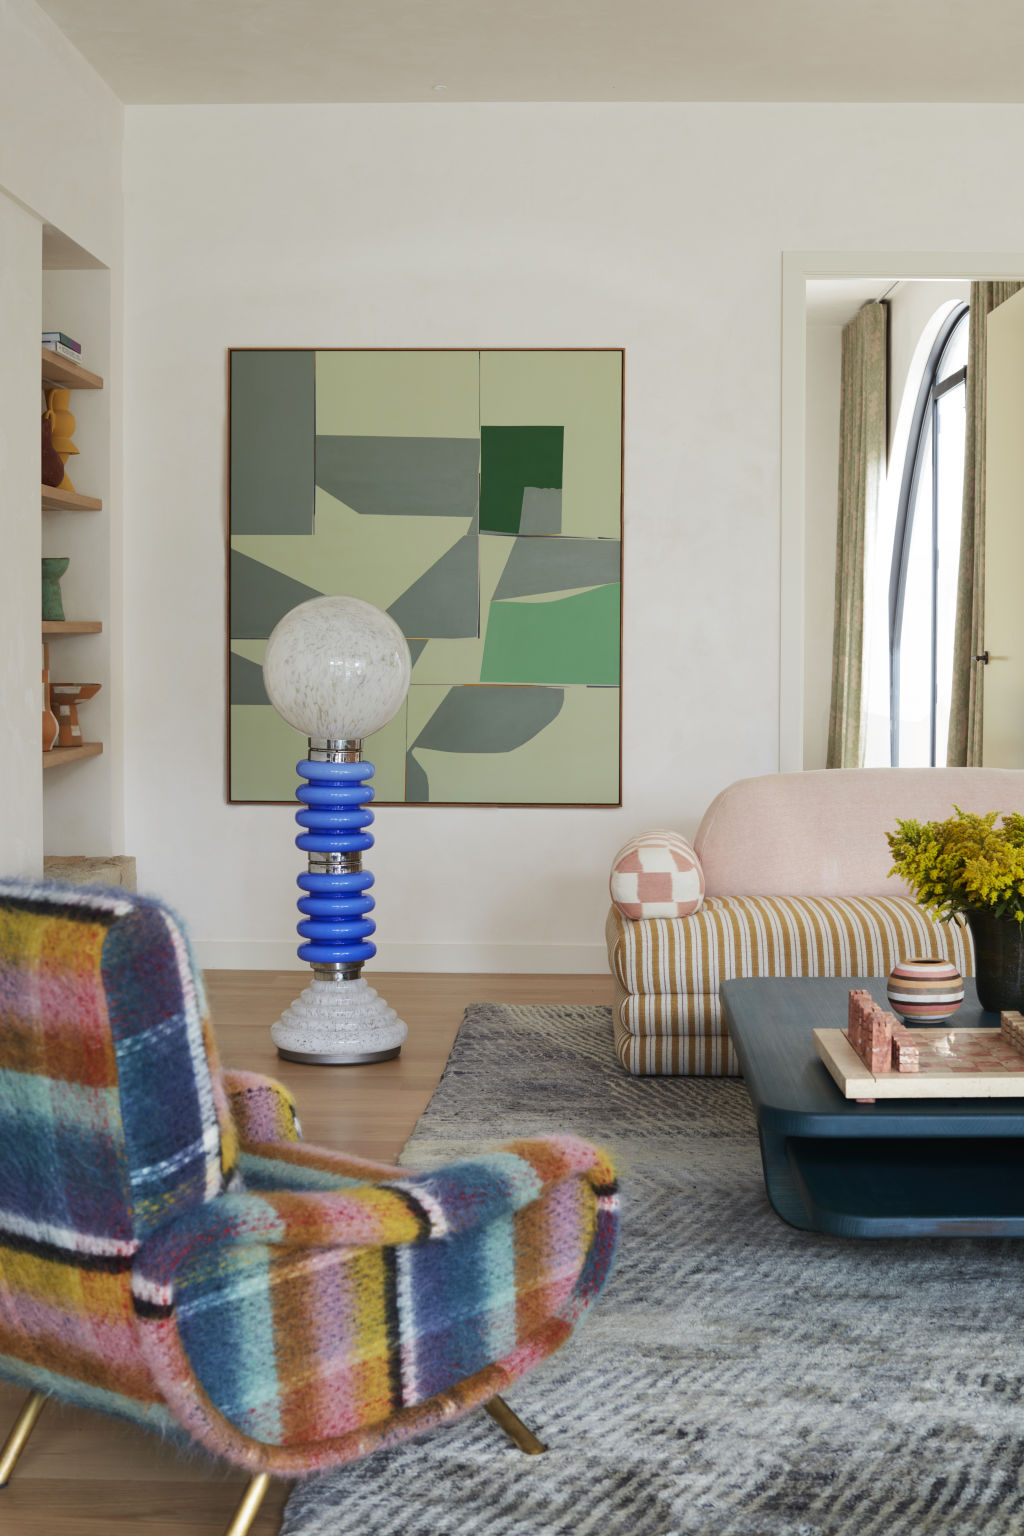 Sullivan used 'vibrant yet muted fabrics' in his Clarks Beach project, with colours linking the prints together. Photo: Prue Ruscoe